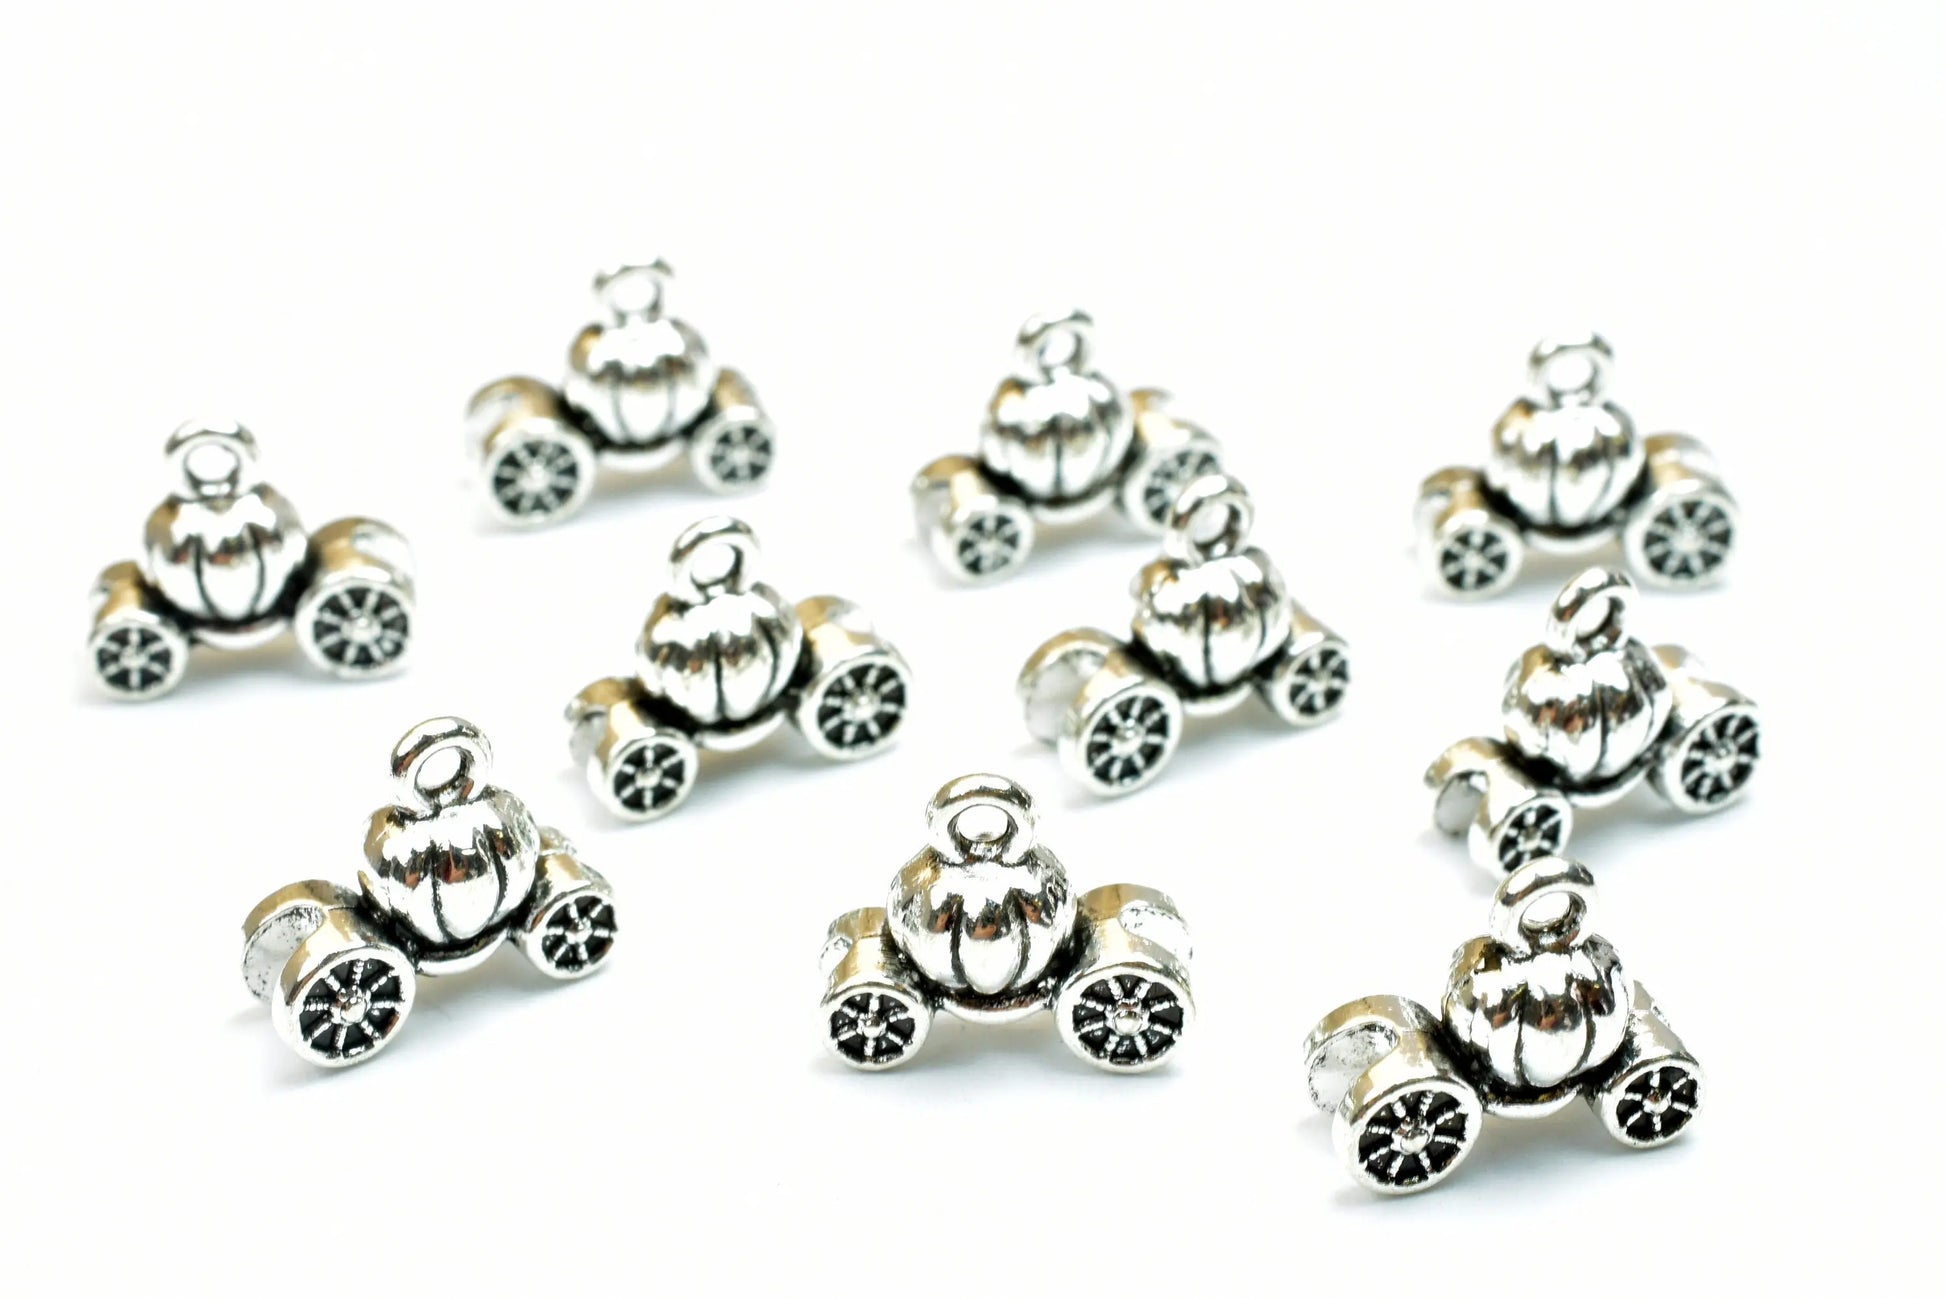 8 PCs Royal Wagon Car Charm Size 12x13mm Silver Color 3D Charm Pendant Finding For Jewelry Making - BeadsFindingDepot